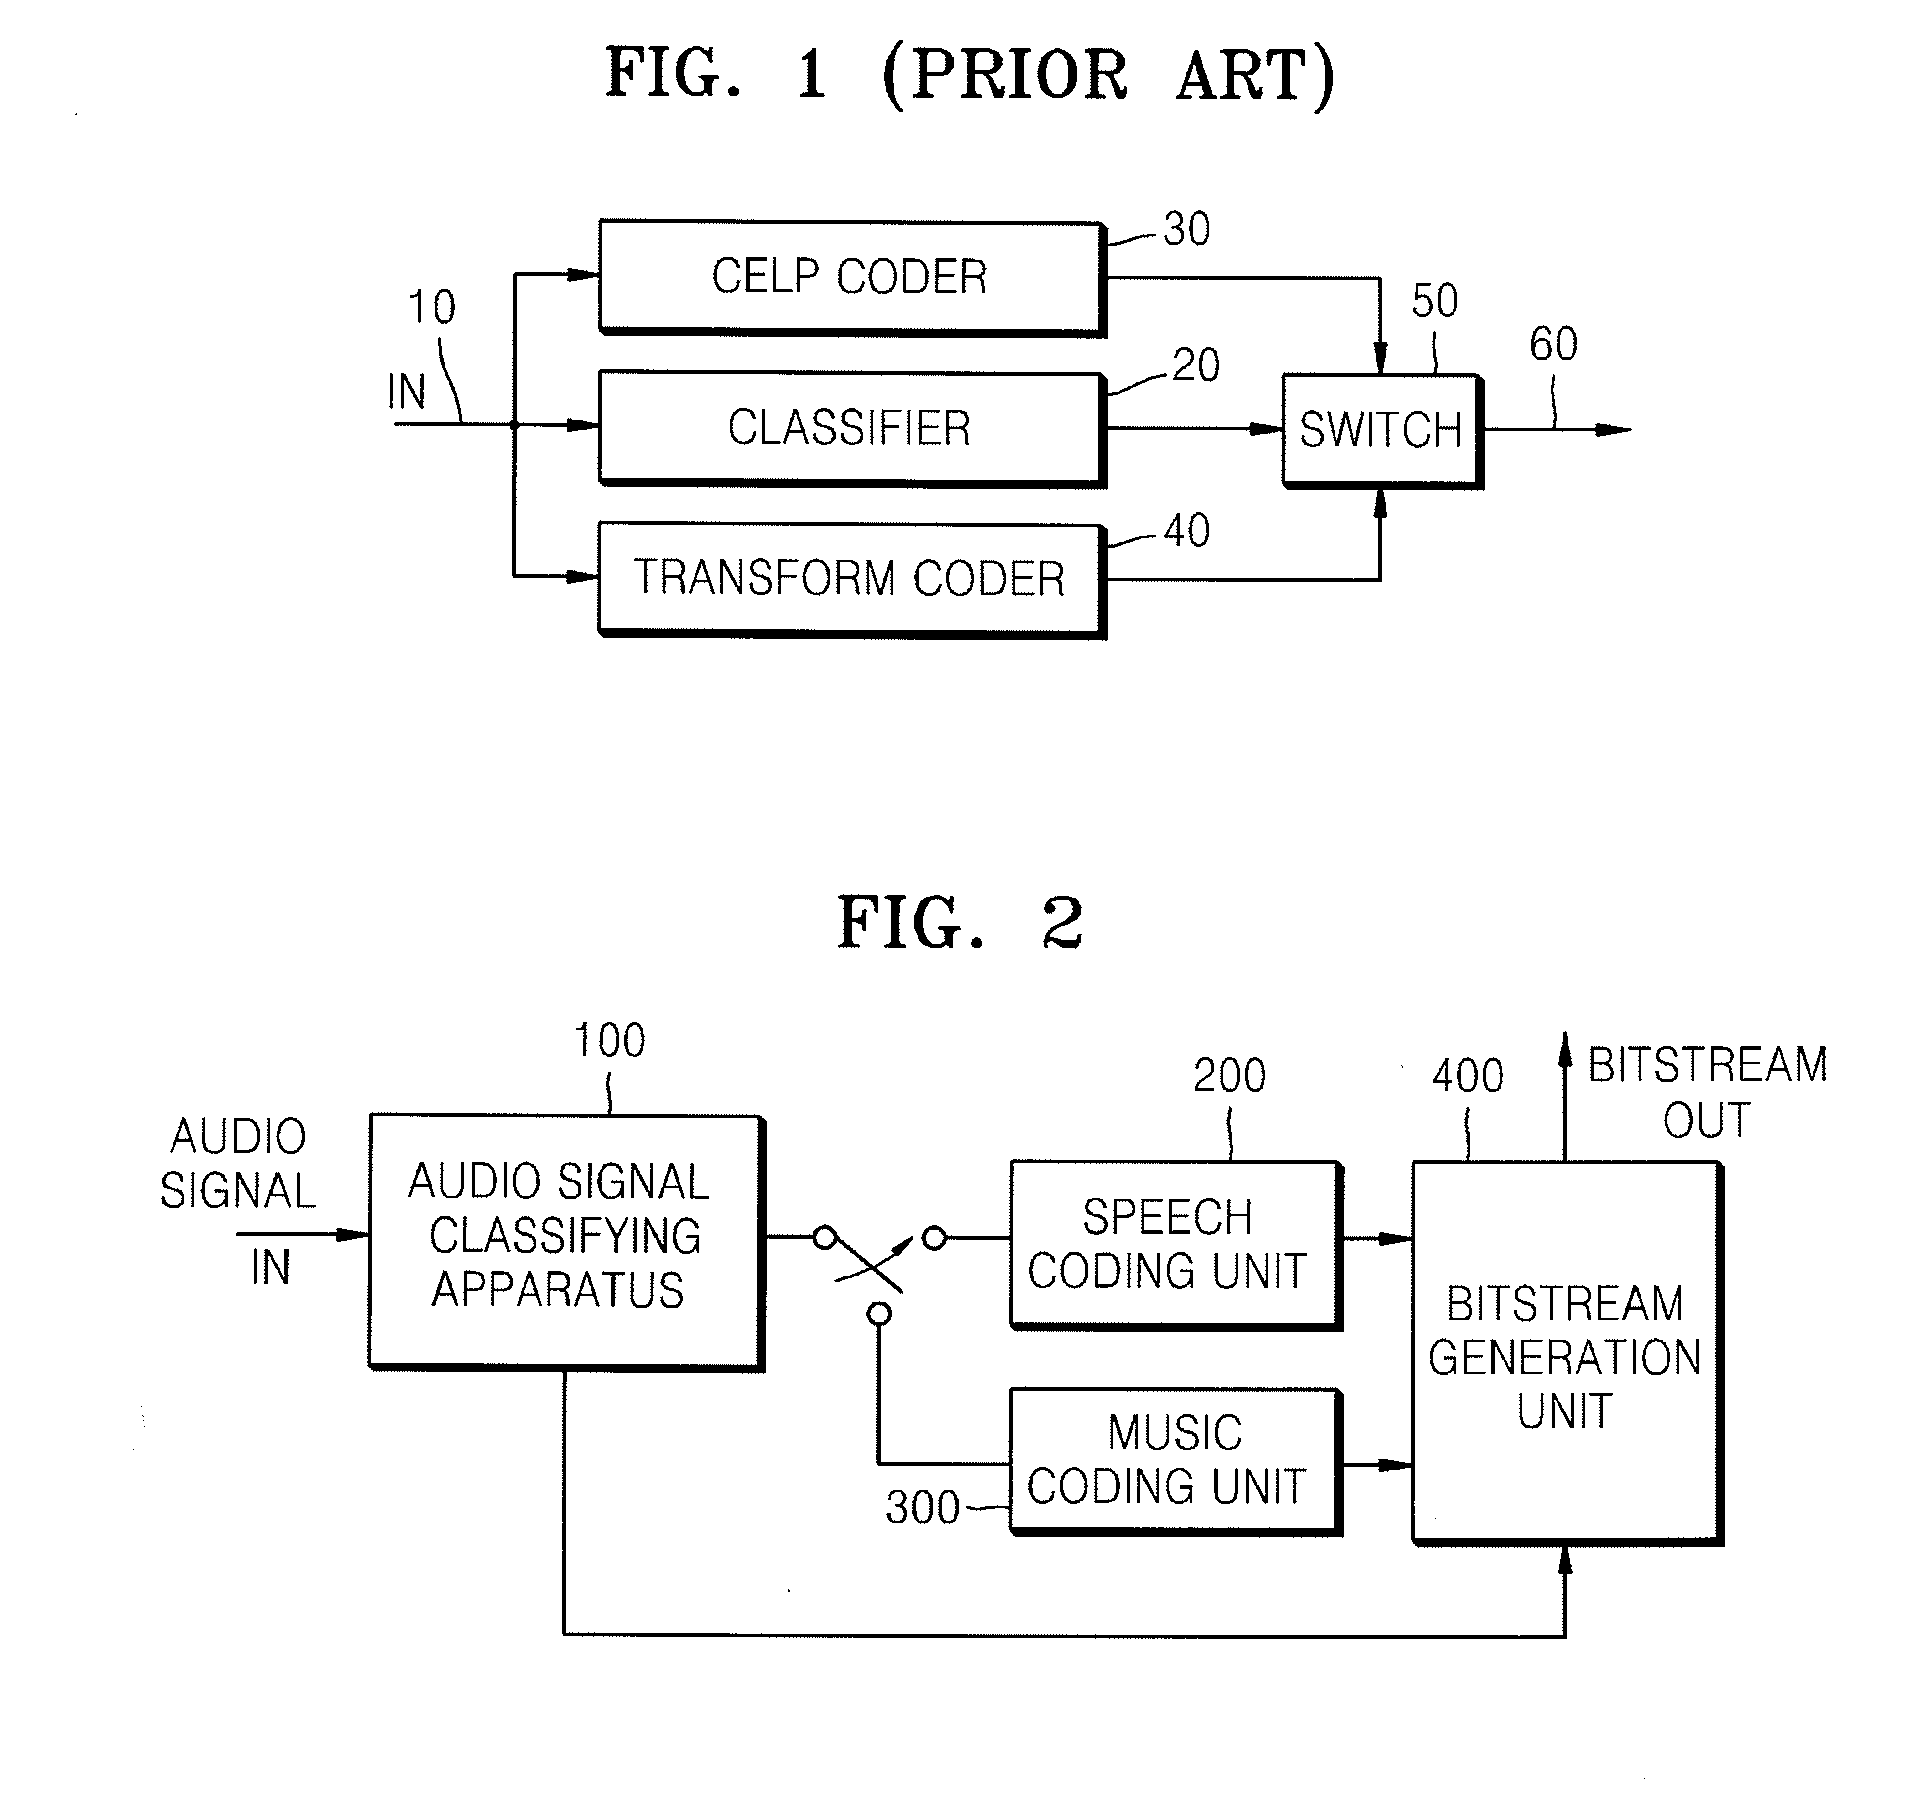 Method, medium, and apparatus to classify for audio signal, and method, medium and apparatus to encode and/or decode for audio signal using the same